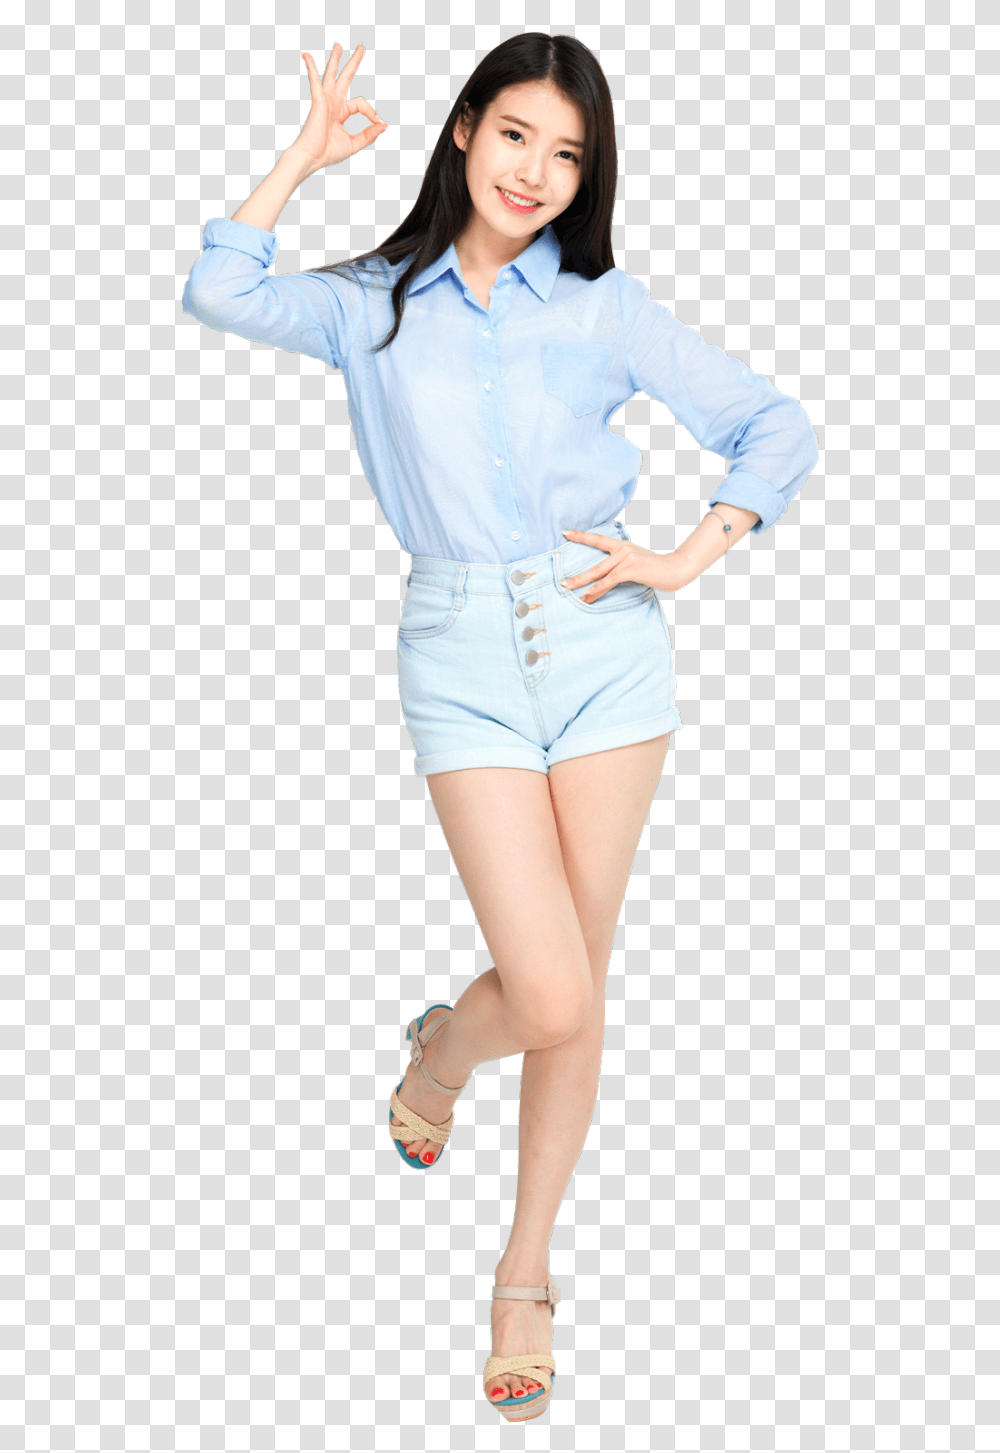 Removedpng File Body Lee Ji Eun, Shorts, Person, Sleeve Transparent Png